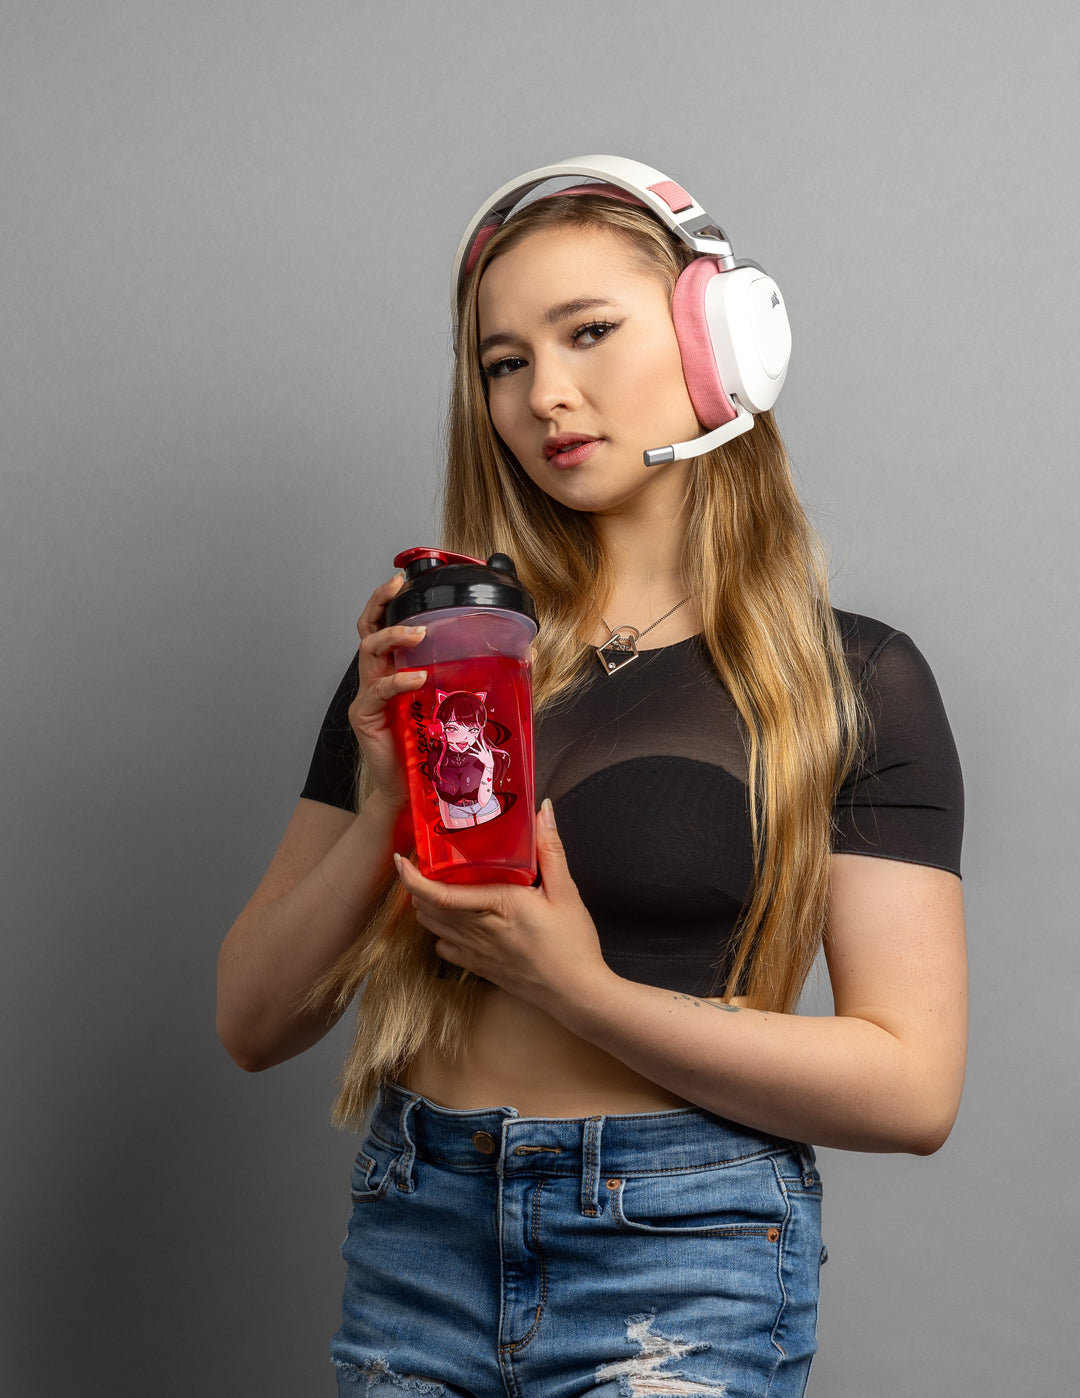 SexyGG Stream Dream Waifu Cup Anime Shaker Bottle For Gamers